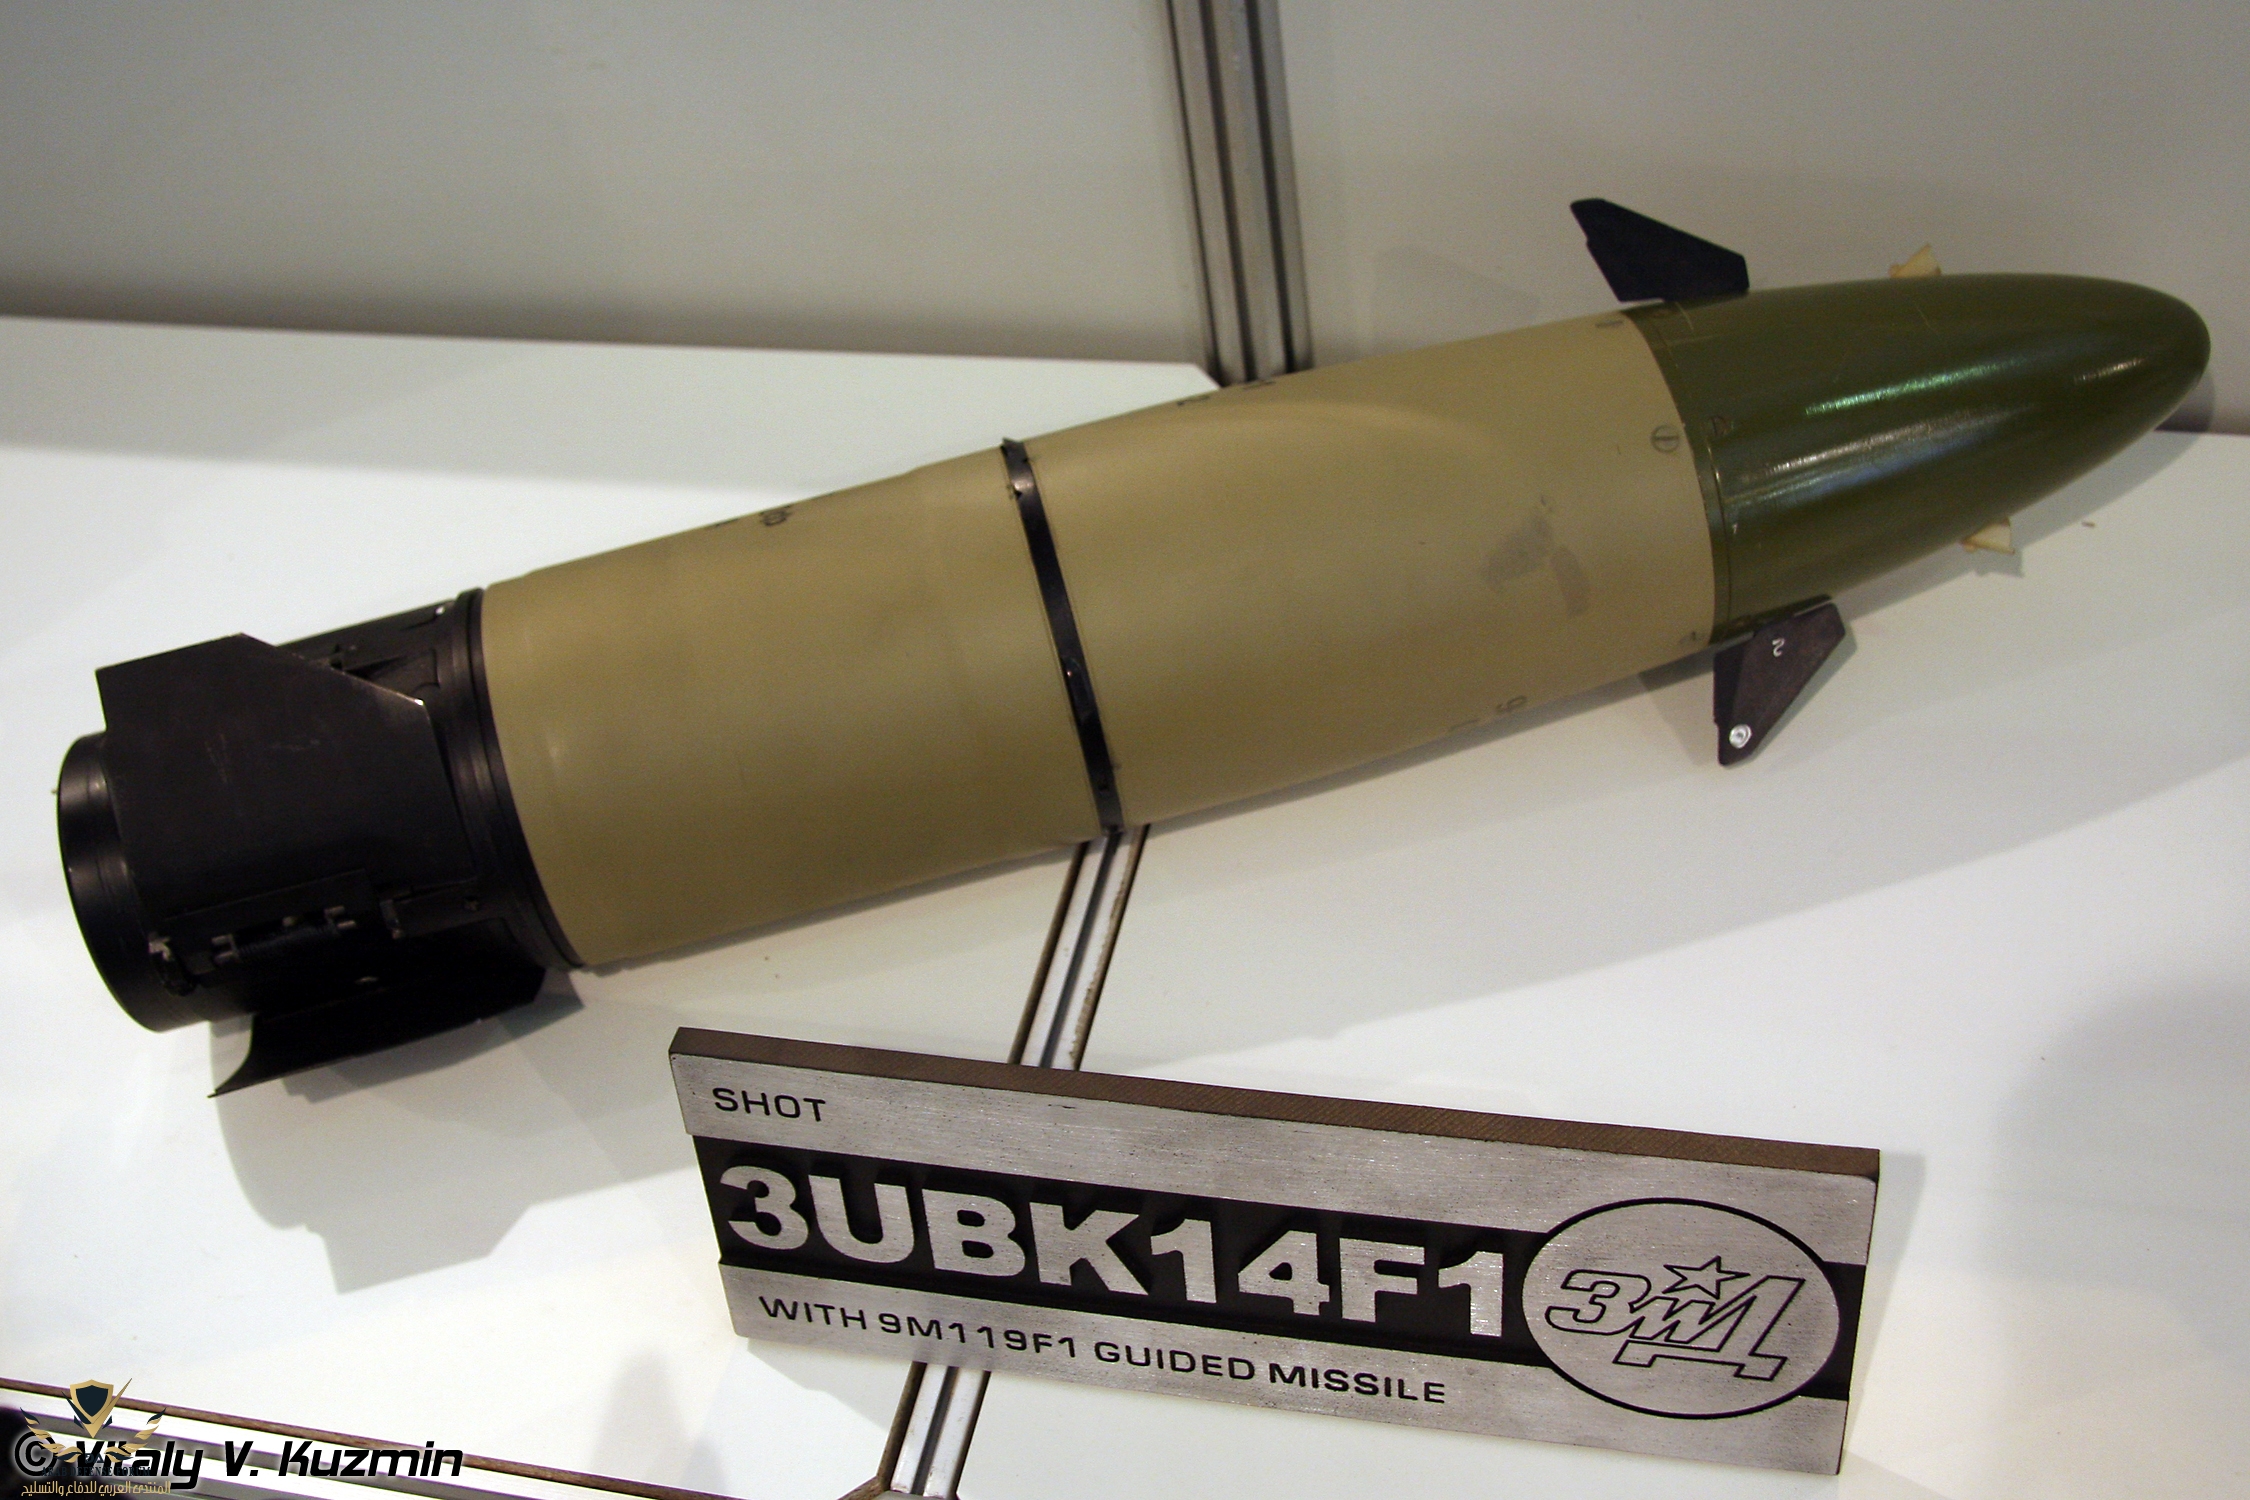 Shot_3UBK14F1_with_9M119F1_guided_missile_-_Engineering_Technologies_2010_Part7_0023_copy.jpg